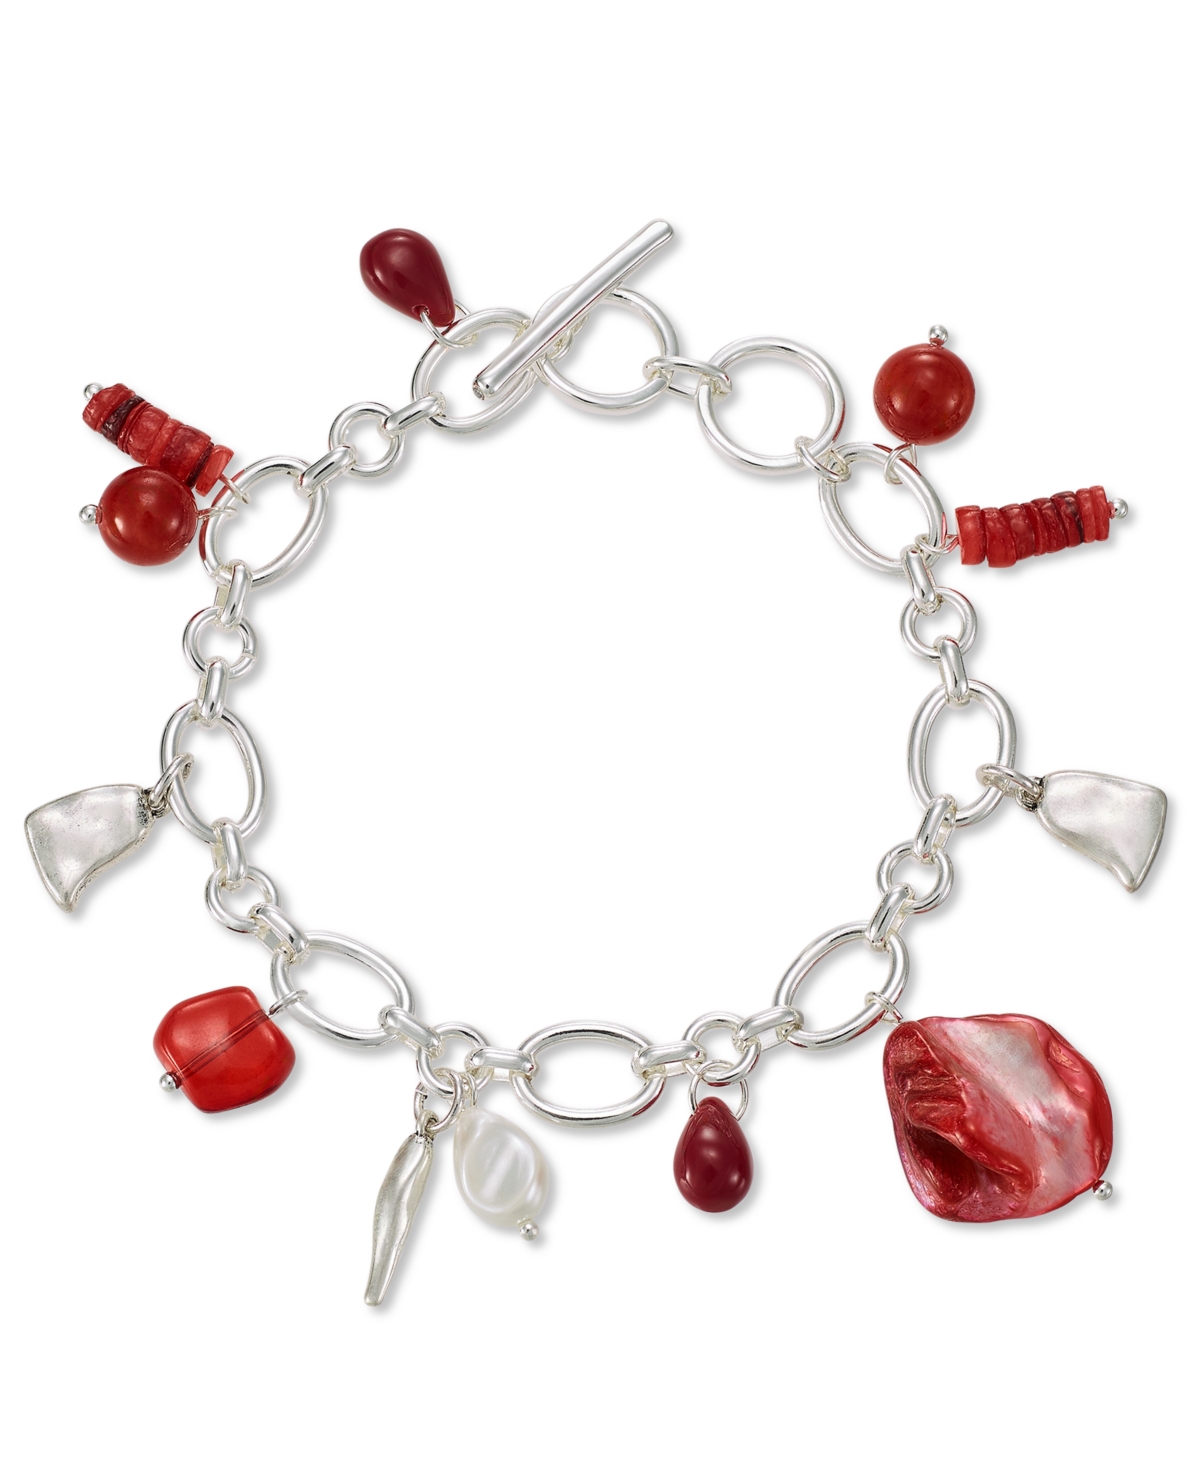 Mixed-Metal Beaded Charm Bracelet, Created for Macy's - Red